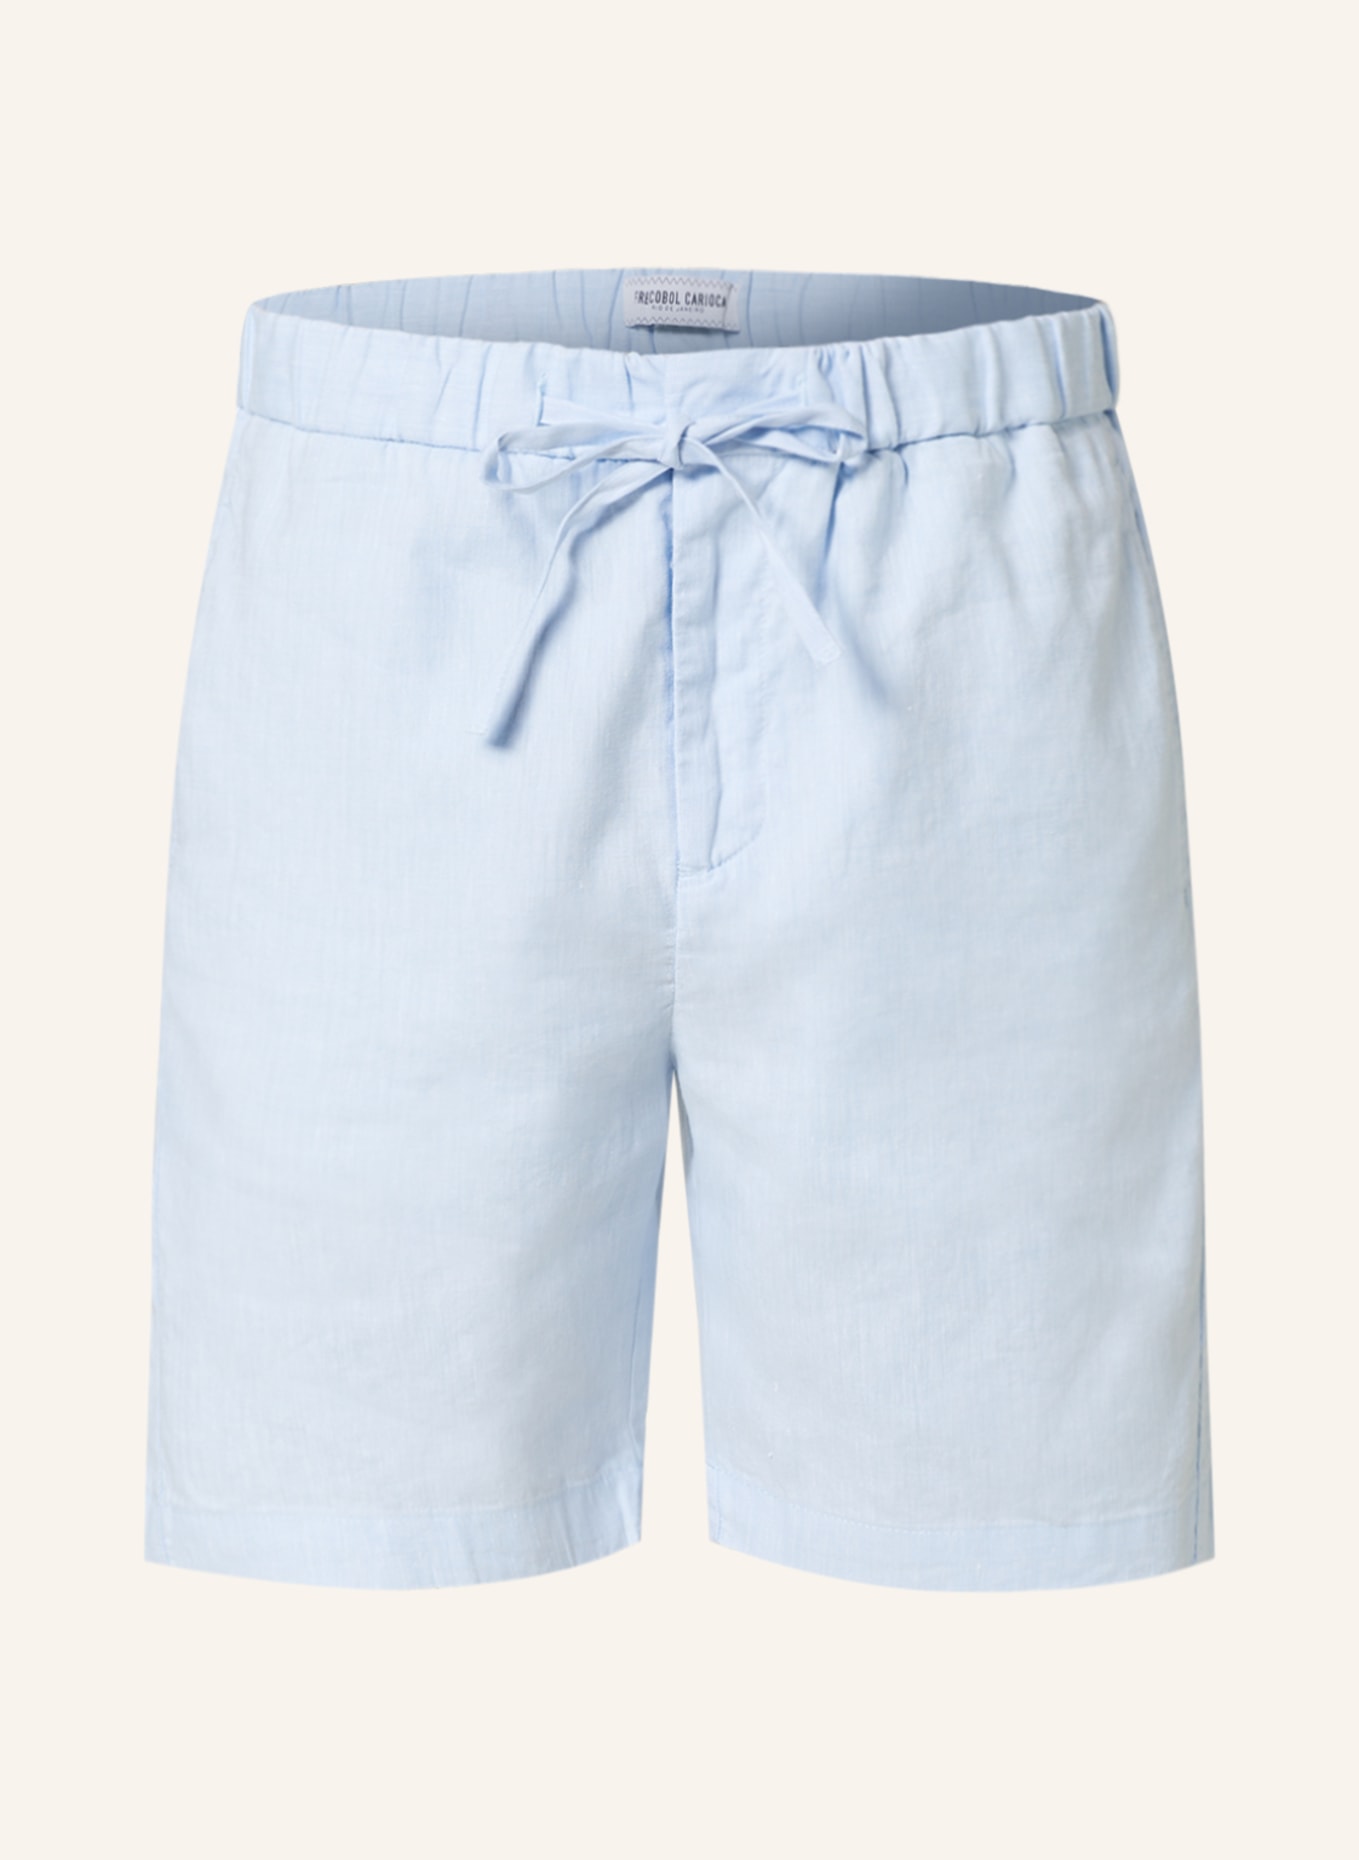 FRESCOBOL CARIOCA Shorts with linen, Color: LIGHT BLUE(Image null)